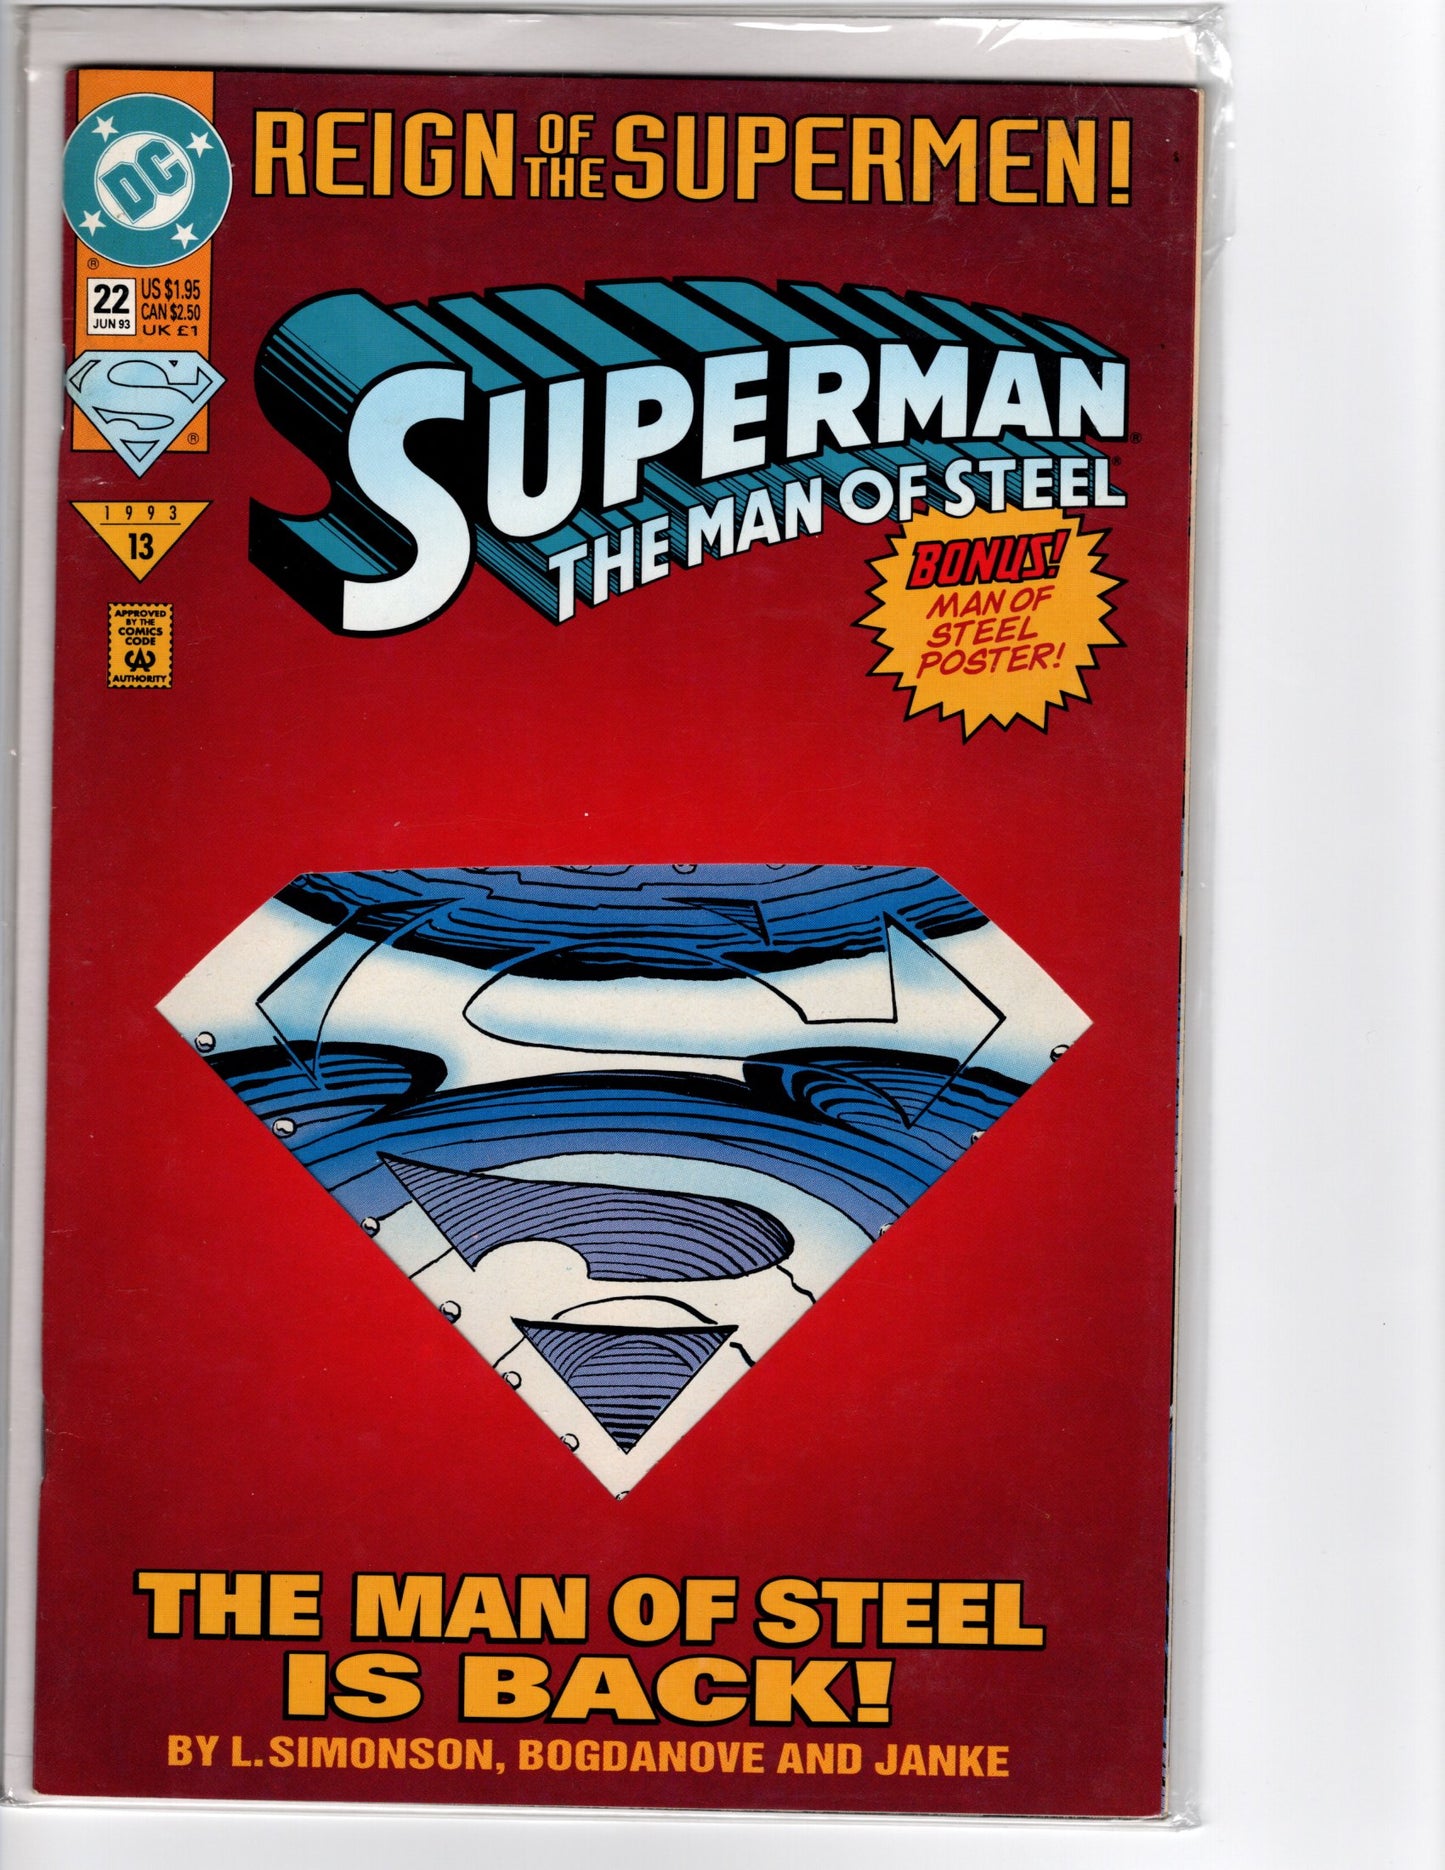 Superman - The Man of Steel No. 22